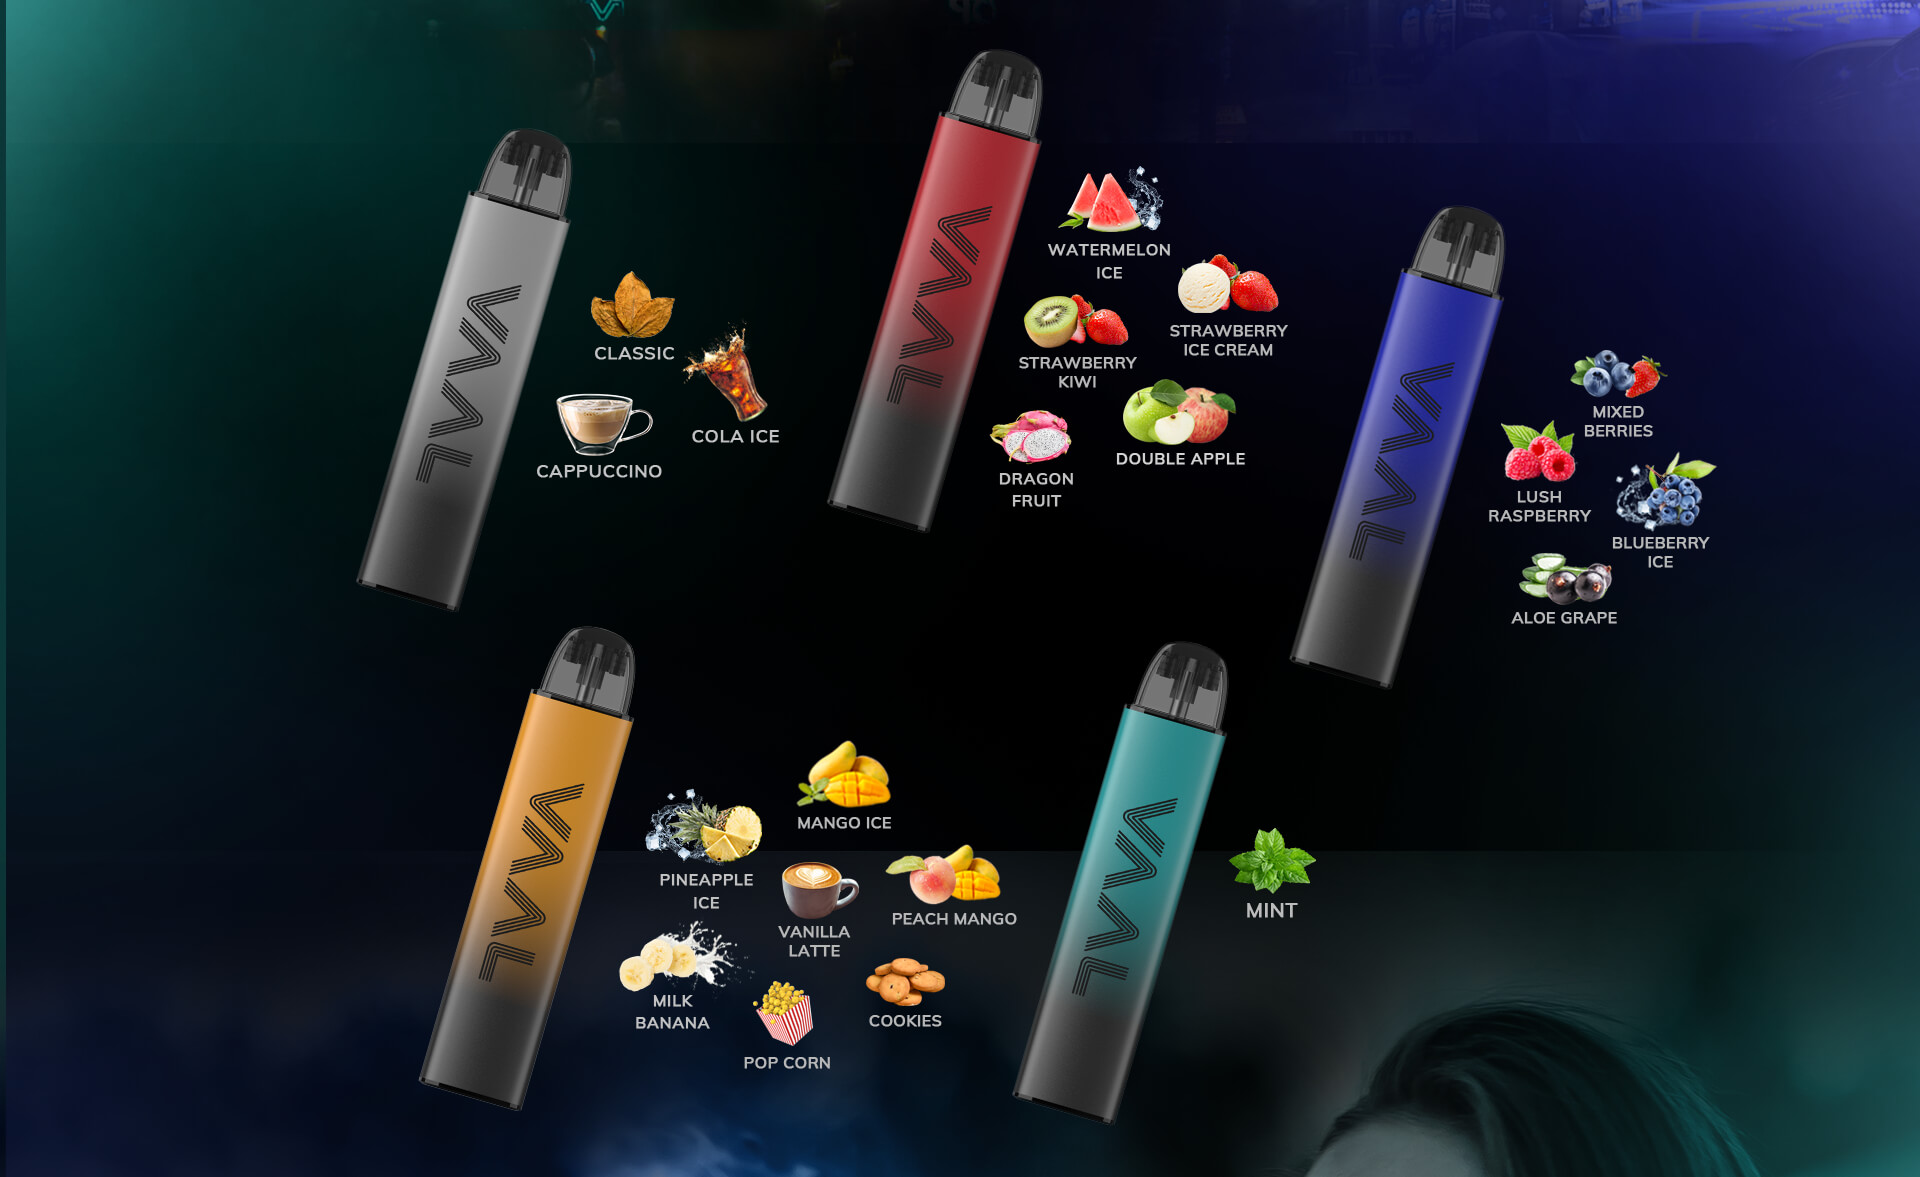 The Vaal CC500 comes in a vast array of different flavors, including Classic, Cappuccino, Cola Ice, Watermelon Ice, Strawberry Ice Cream, Strawberry Kiwi, Double Apple, Dragon Fruit, Mixed Berries, Lush Raspberry, Blueberry Ice, Aloe grape, Mango Ice, Pineapple Ice, Vanilla Latte, Peach Mango, Milk Banana, Pop Corn, Cookies and Mint.